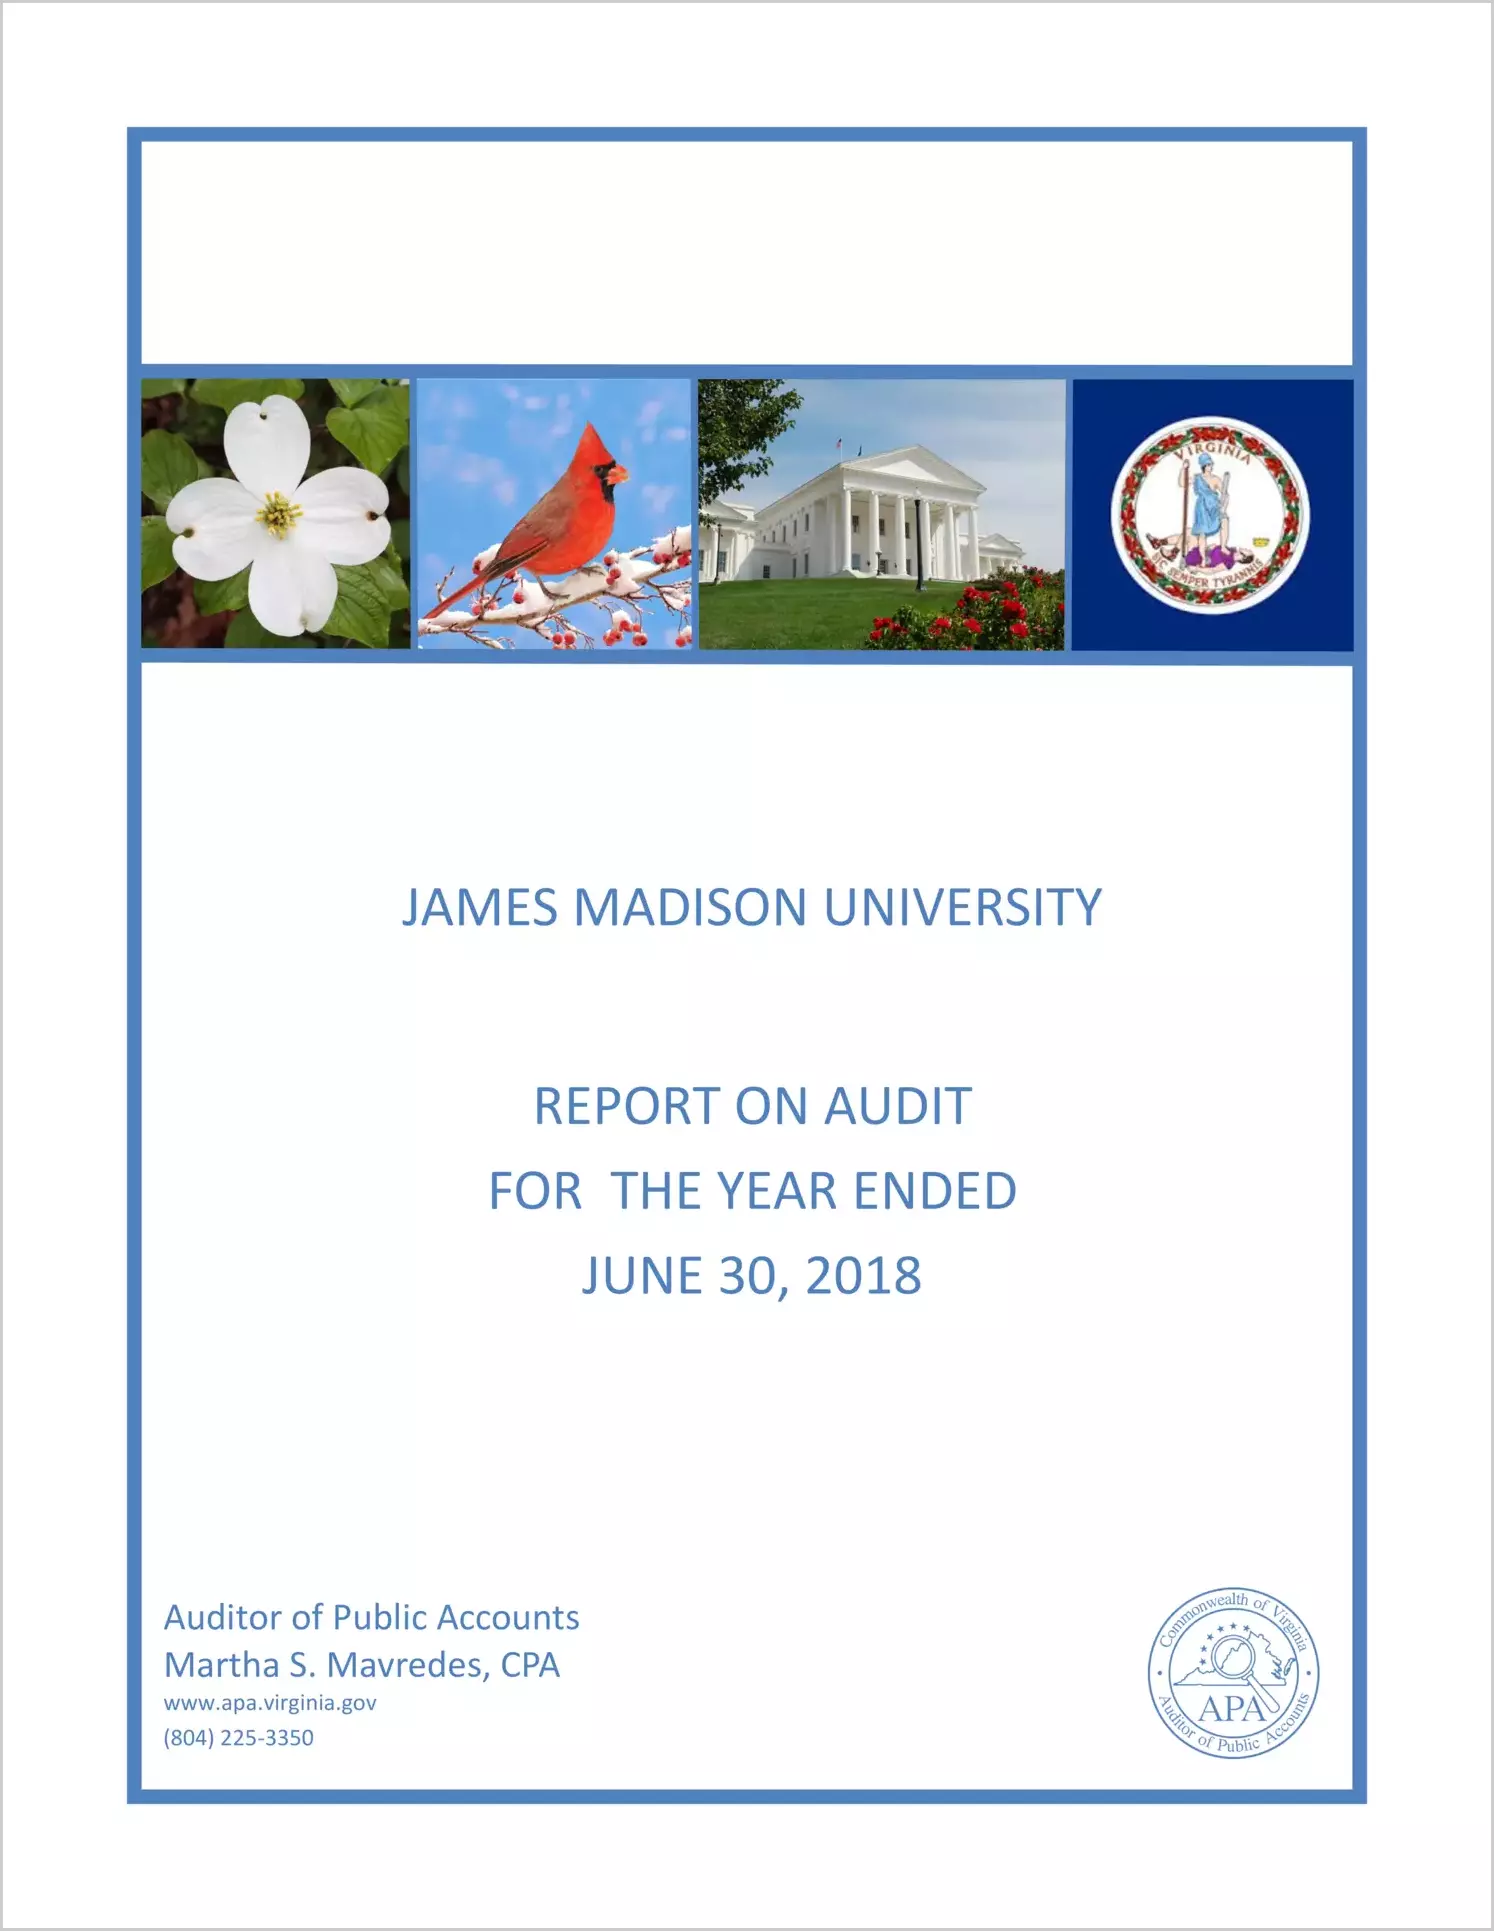 James Madison University for the year ended June 30, 2018